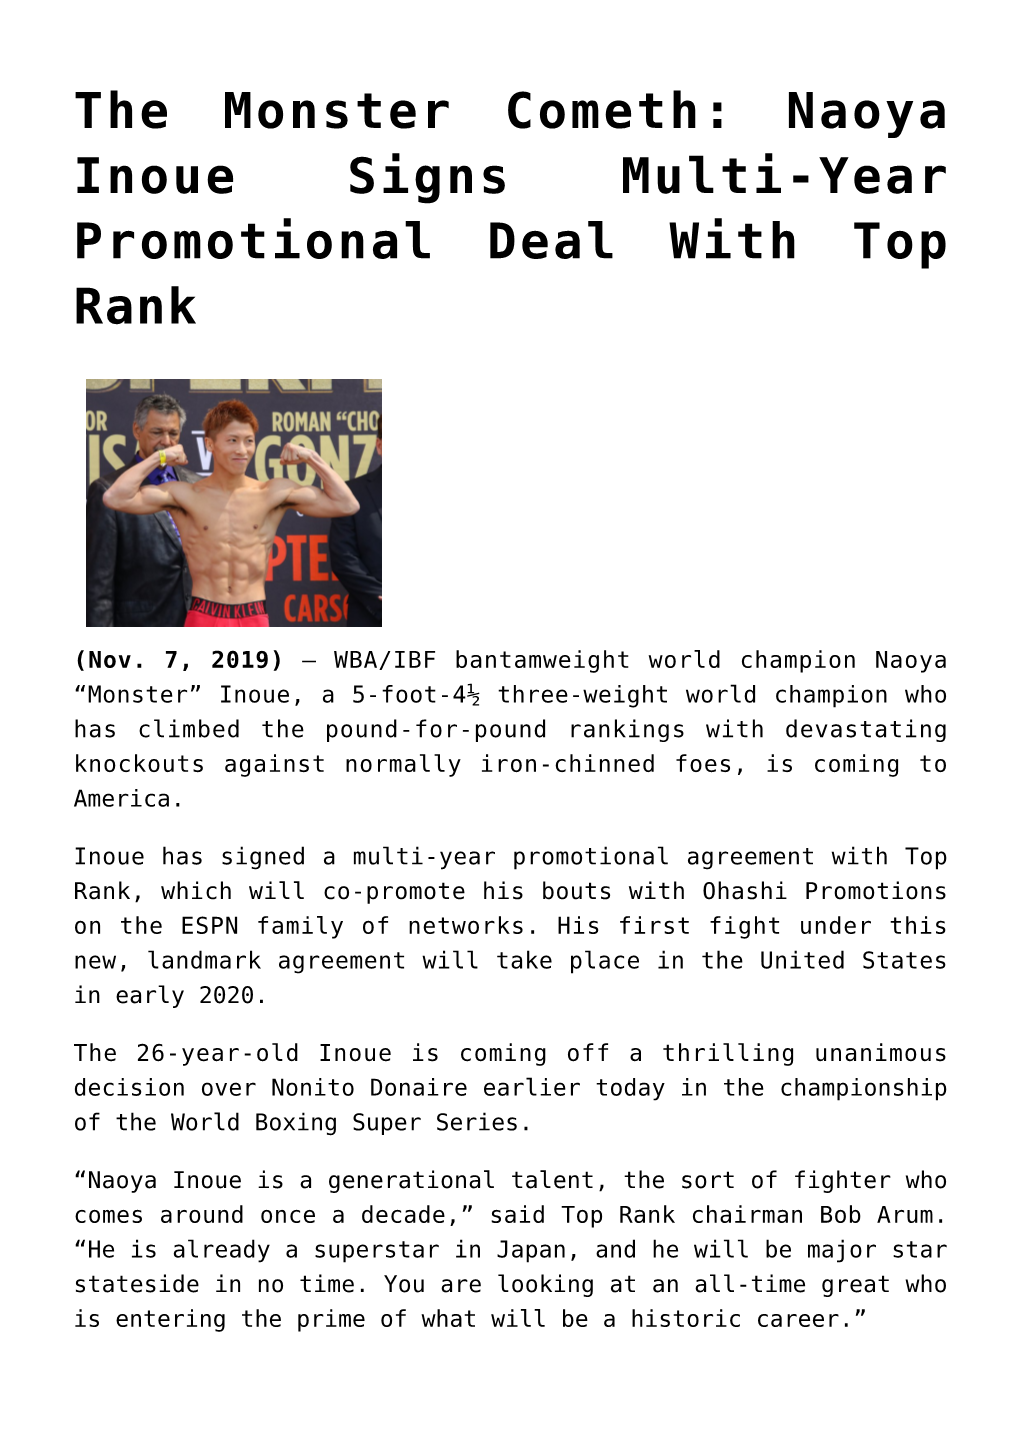 The Monster Cometh: Naoya Inoue Signs Multi-Year Promotional Deal with Top Rank